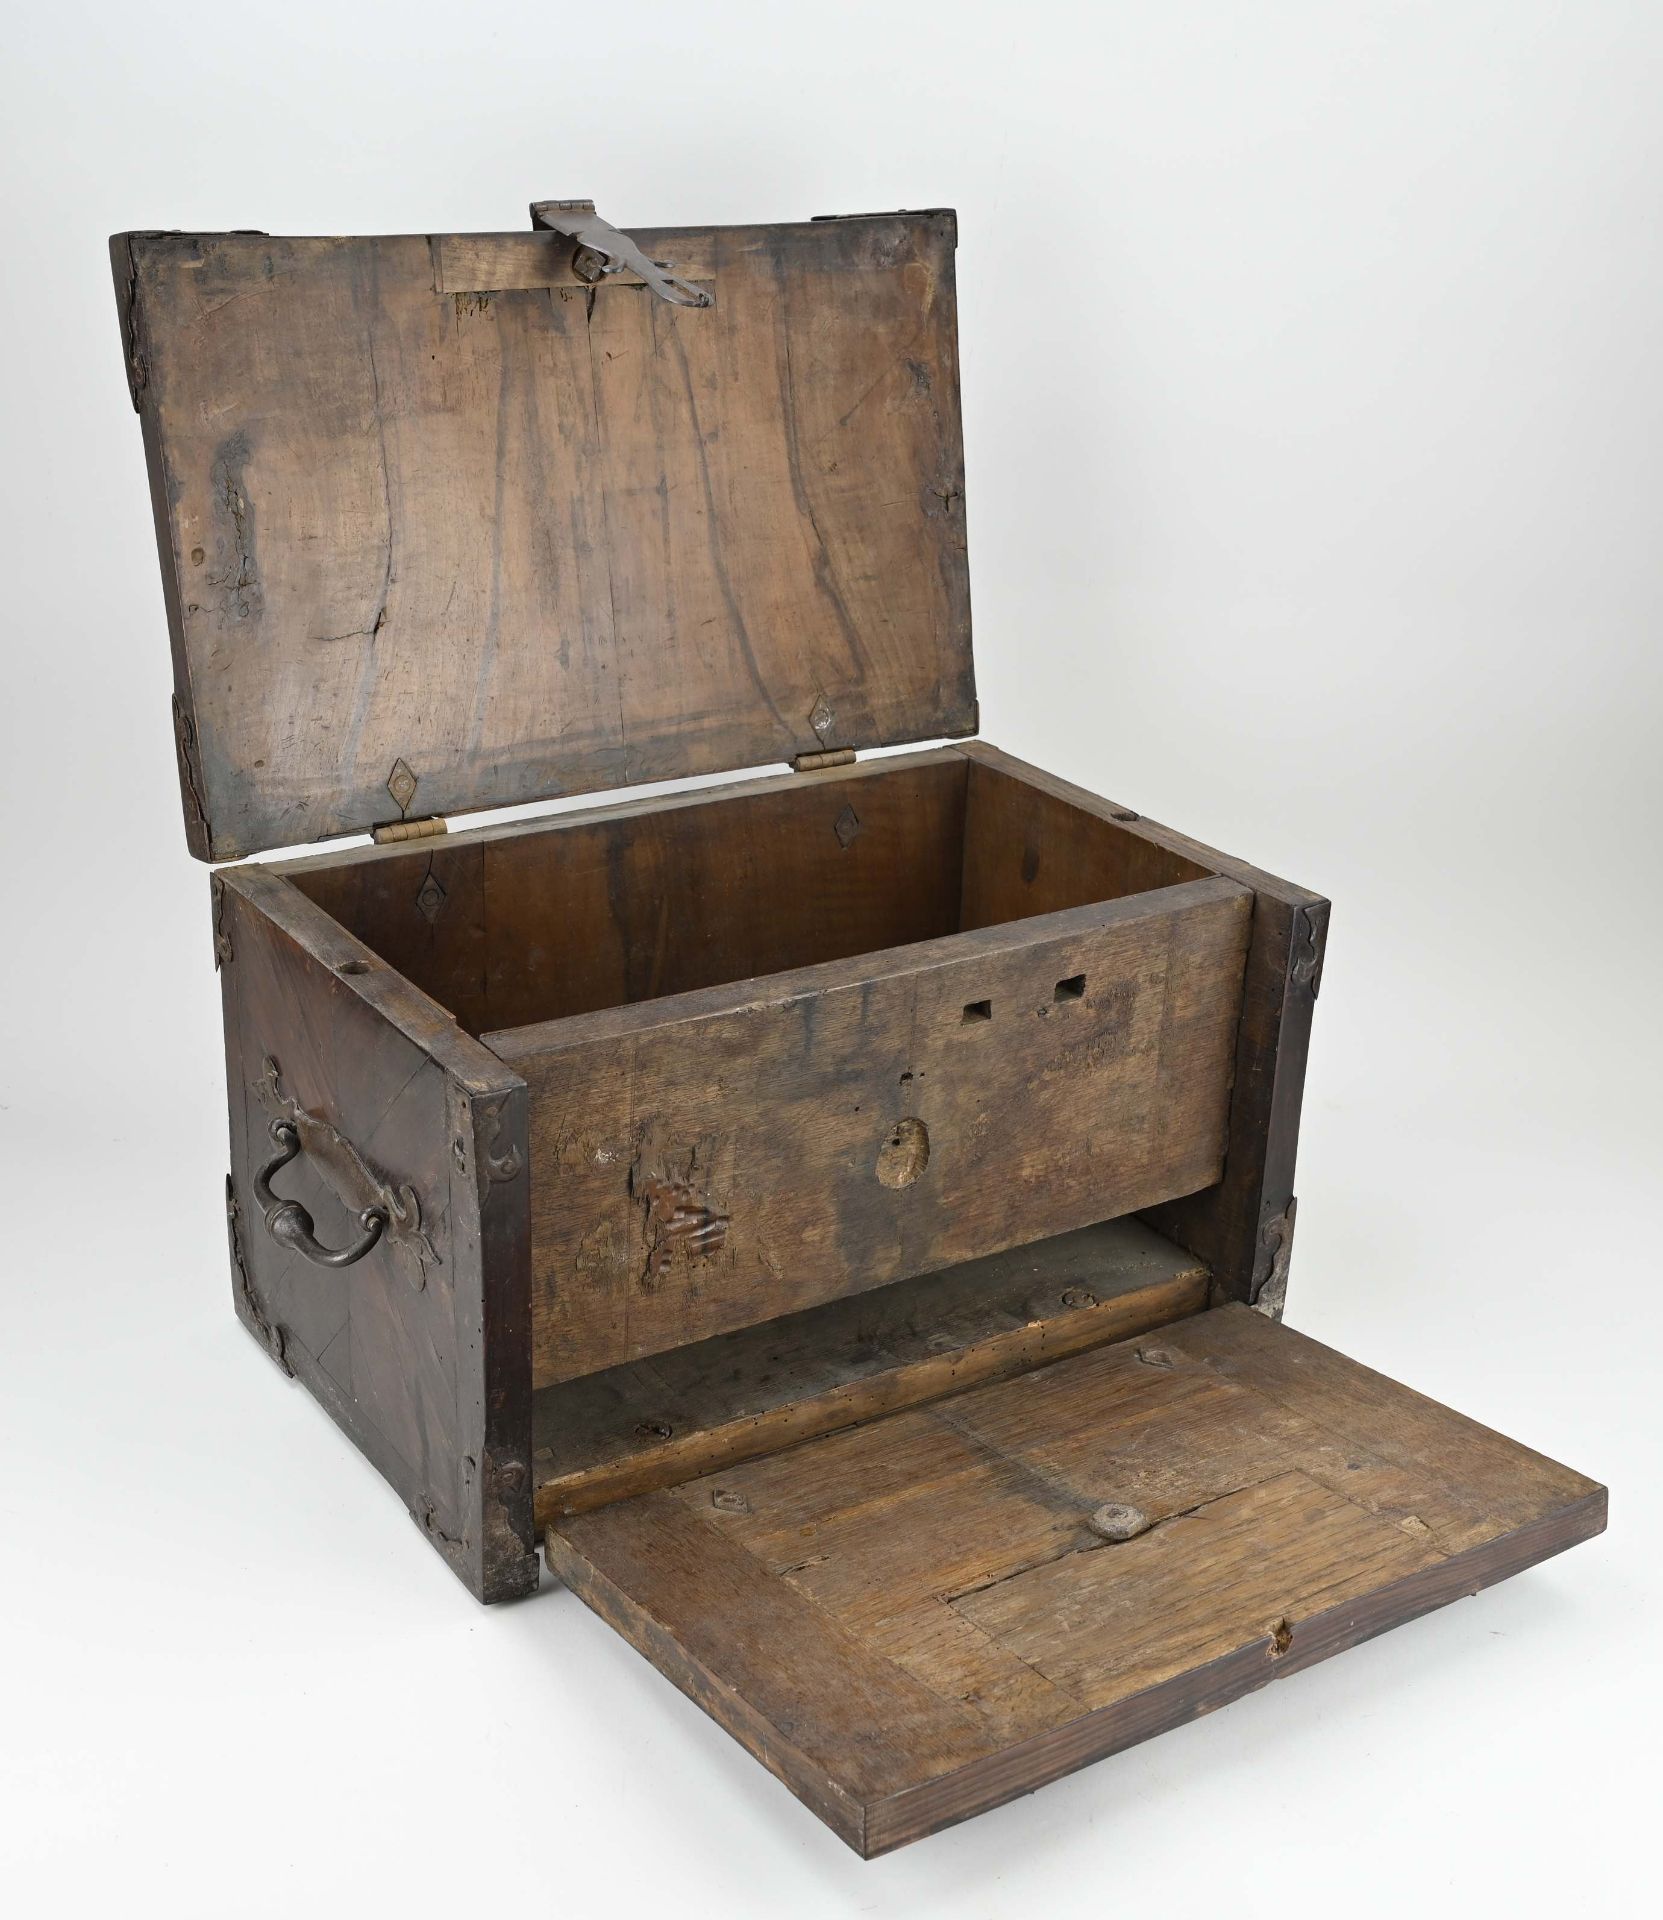 Rare 18th century ship's chest - Image 2 of 3